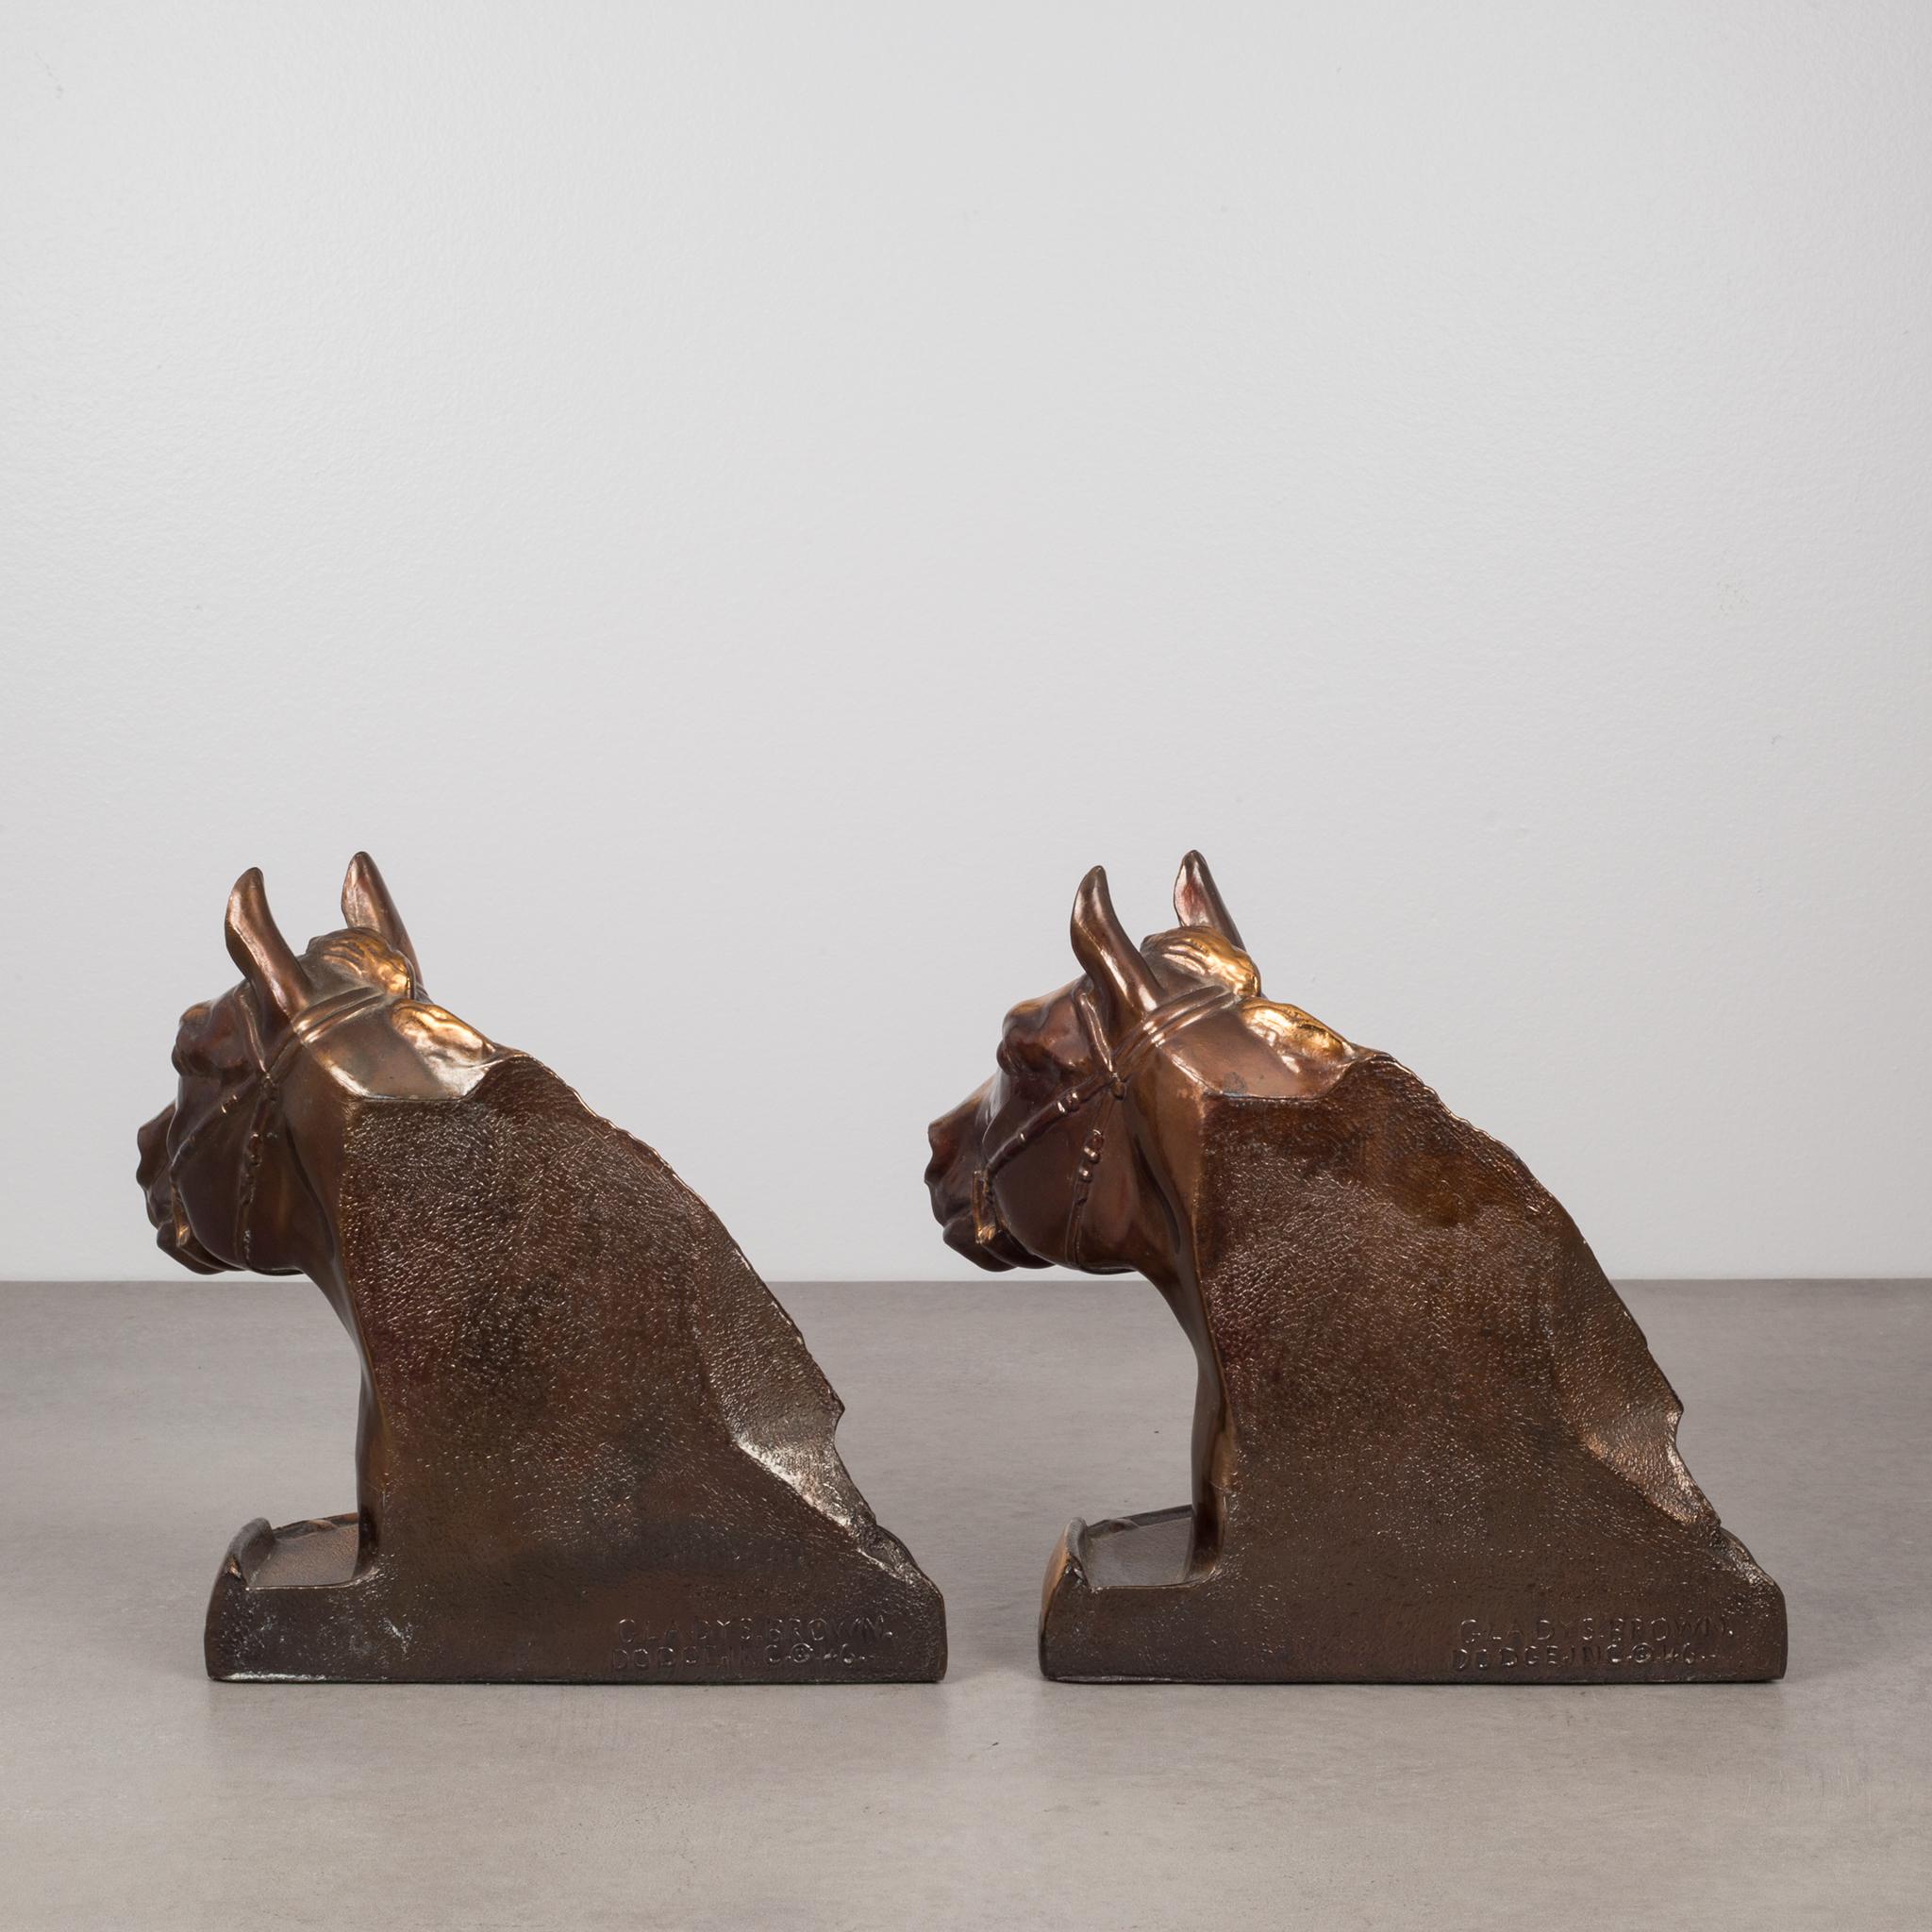 Rustic 1940s Bronze-Plated Horse Bookends Signed by Gladys Brown